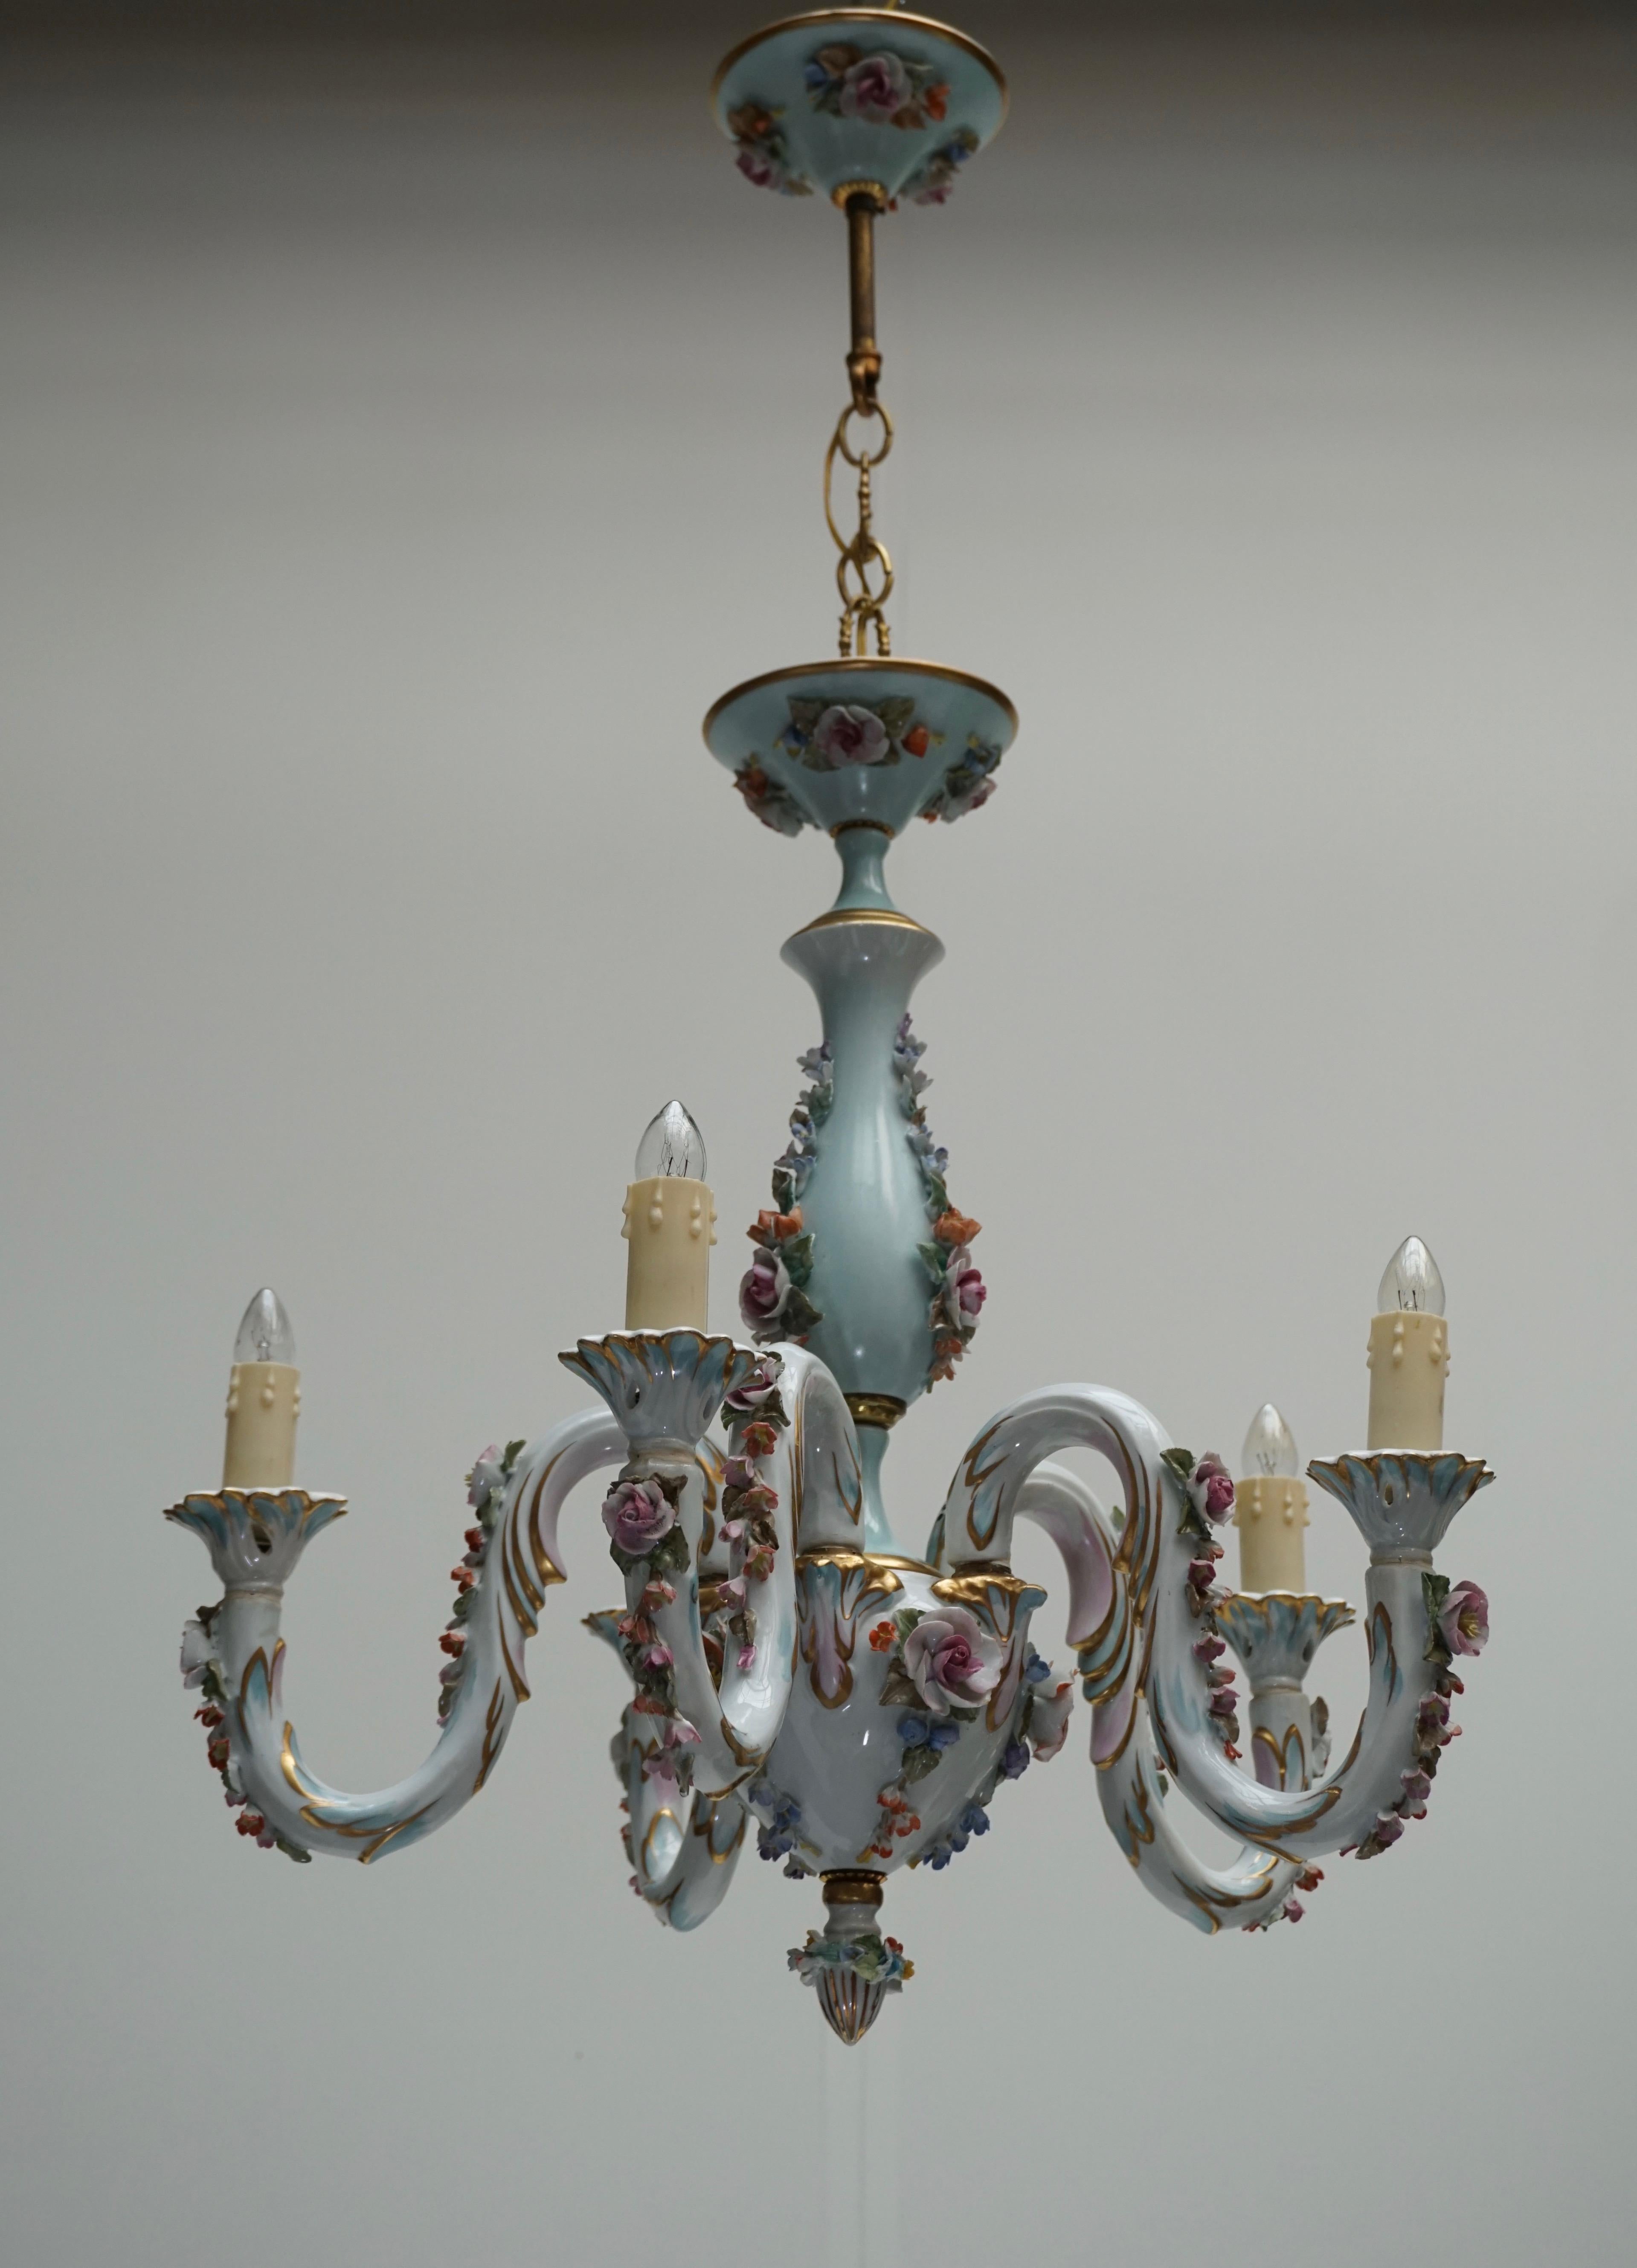 Capodimonte Porcelain Five Lights Chandelier Floral Patterns, Italy In Good Condition For Sale In Antwerp, BE